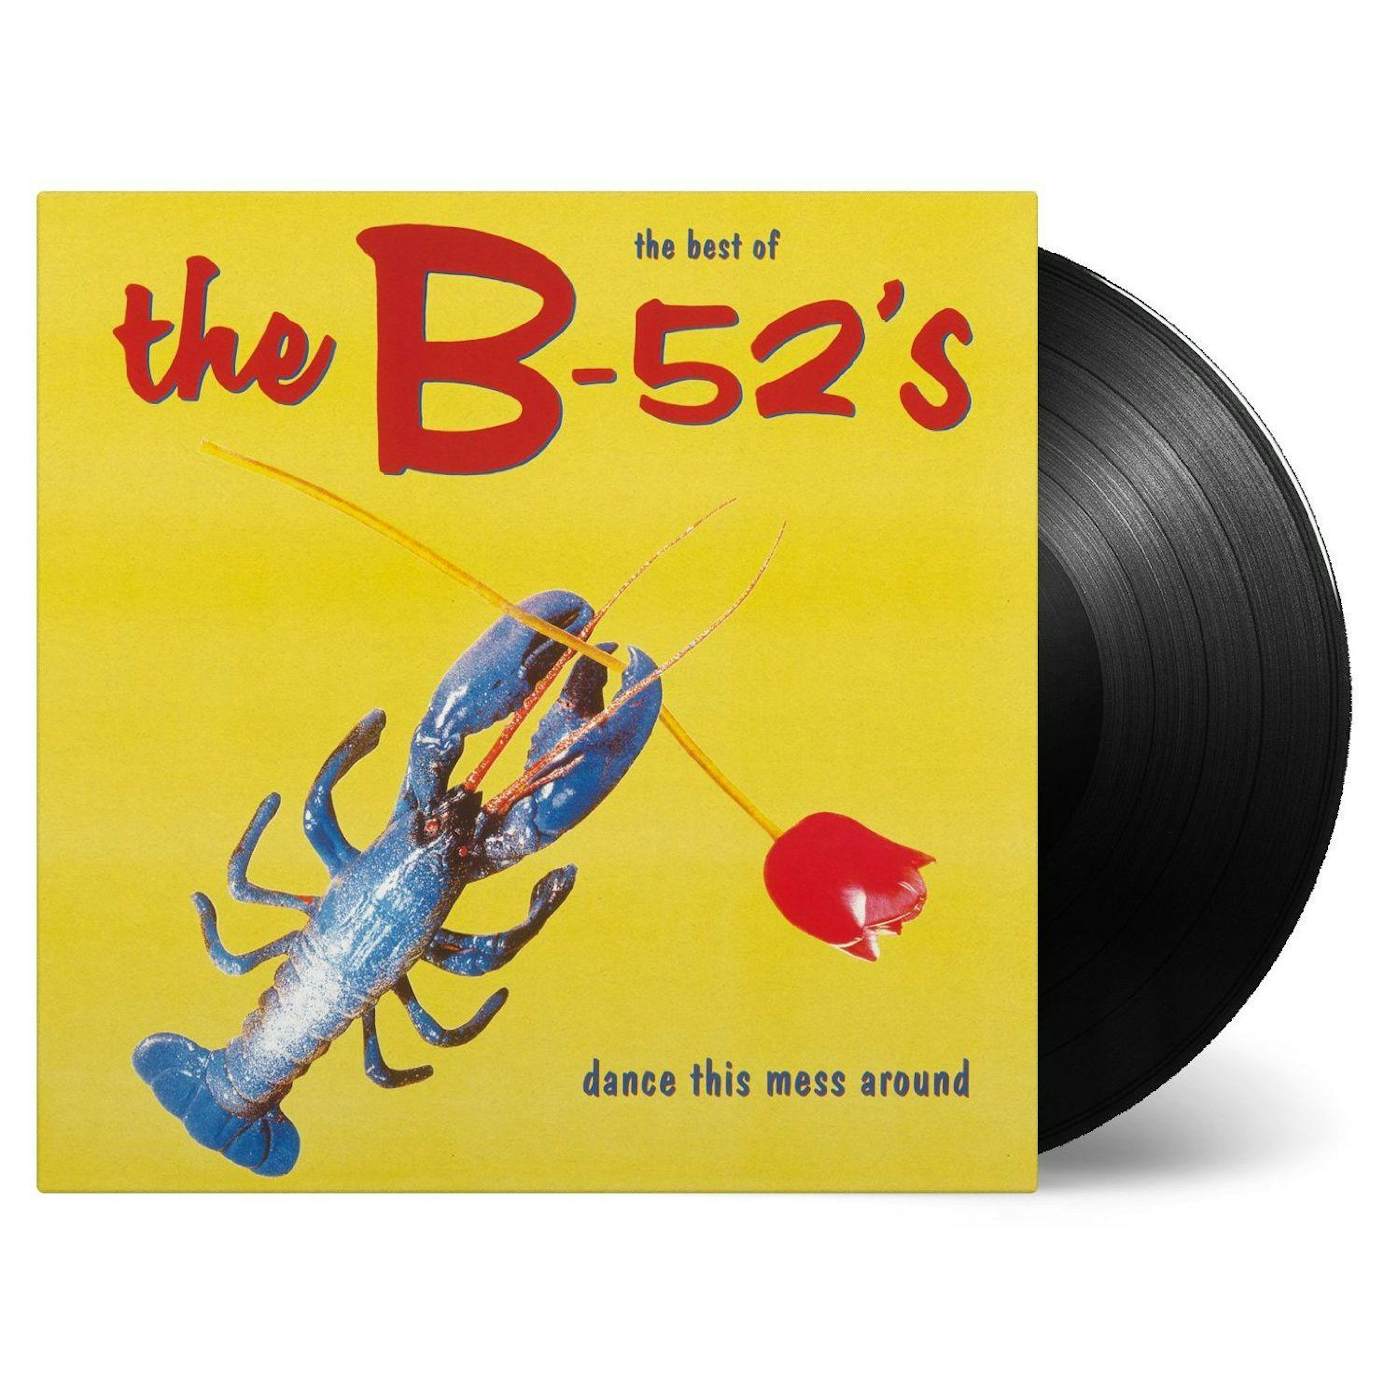 The B-52's DANCE THIS MESS AROUND: THE BEST OF Vinyl Record